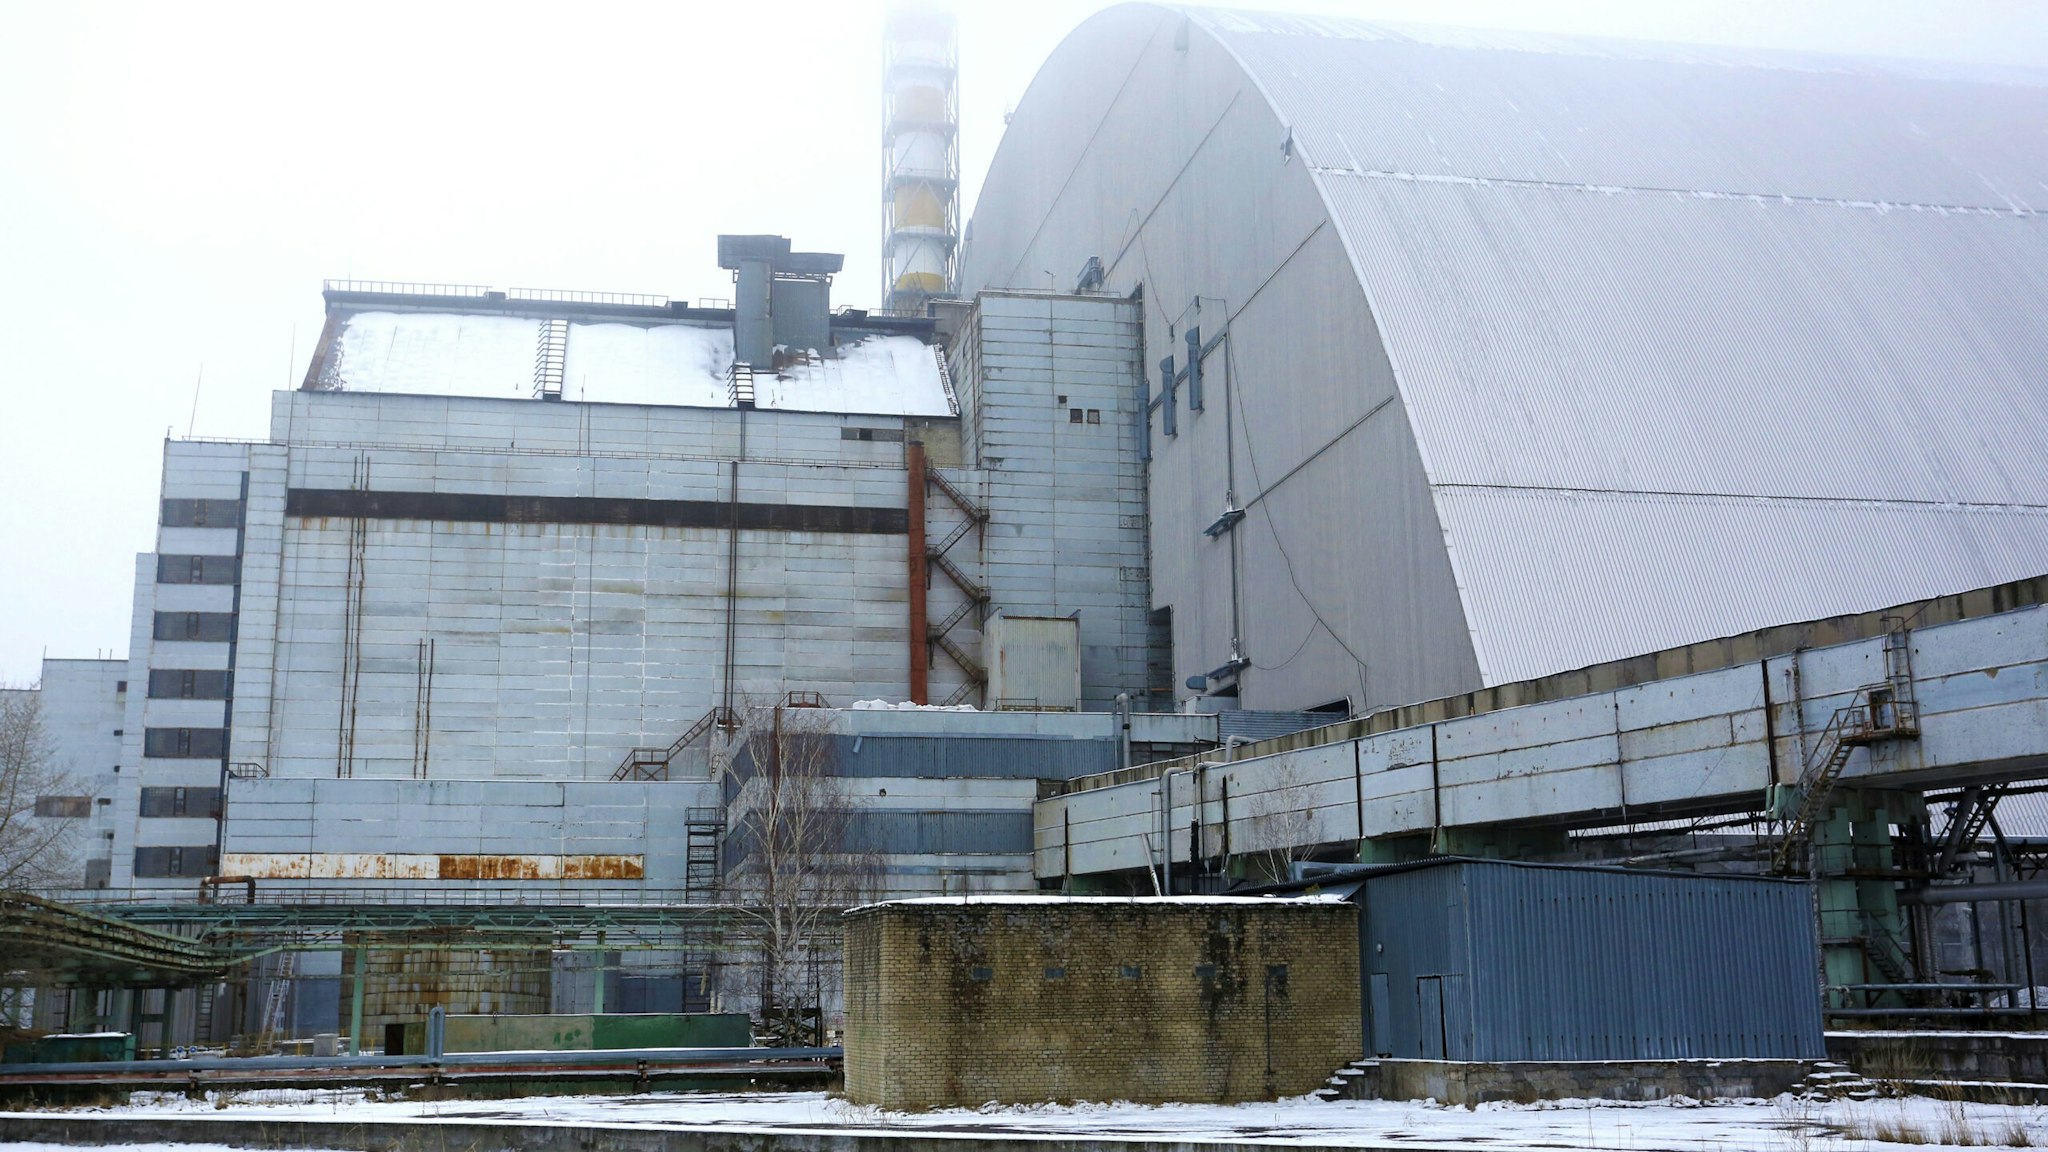 A worker stands next to the construction area of the Interim Spent Nuclear Fuel Dry Storage Facility (ISF-2) near the Chernobyl nuclear power plant, in Chernobyl, Ukraine, 22 December 2016. The new protective shelter over the remains of the nuclear reactor Unit 4 will secure the affected fourth reactor. The shelter is over 105 metres tall and weighs 36,000 tons. The explosion of Unit 4 of the Chernobyl nuclear power plant in the early hours of 26 April 1986 is still regarded the biggest accident in the history of nuclear power generation